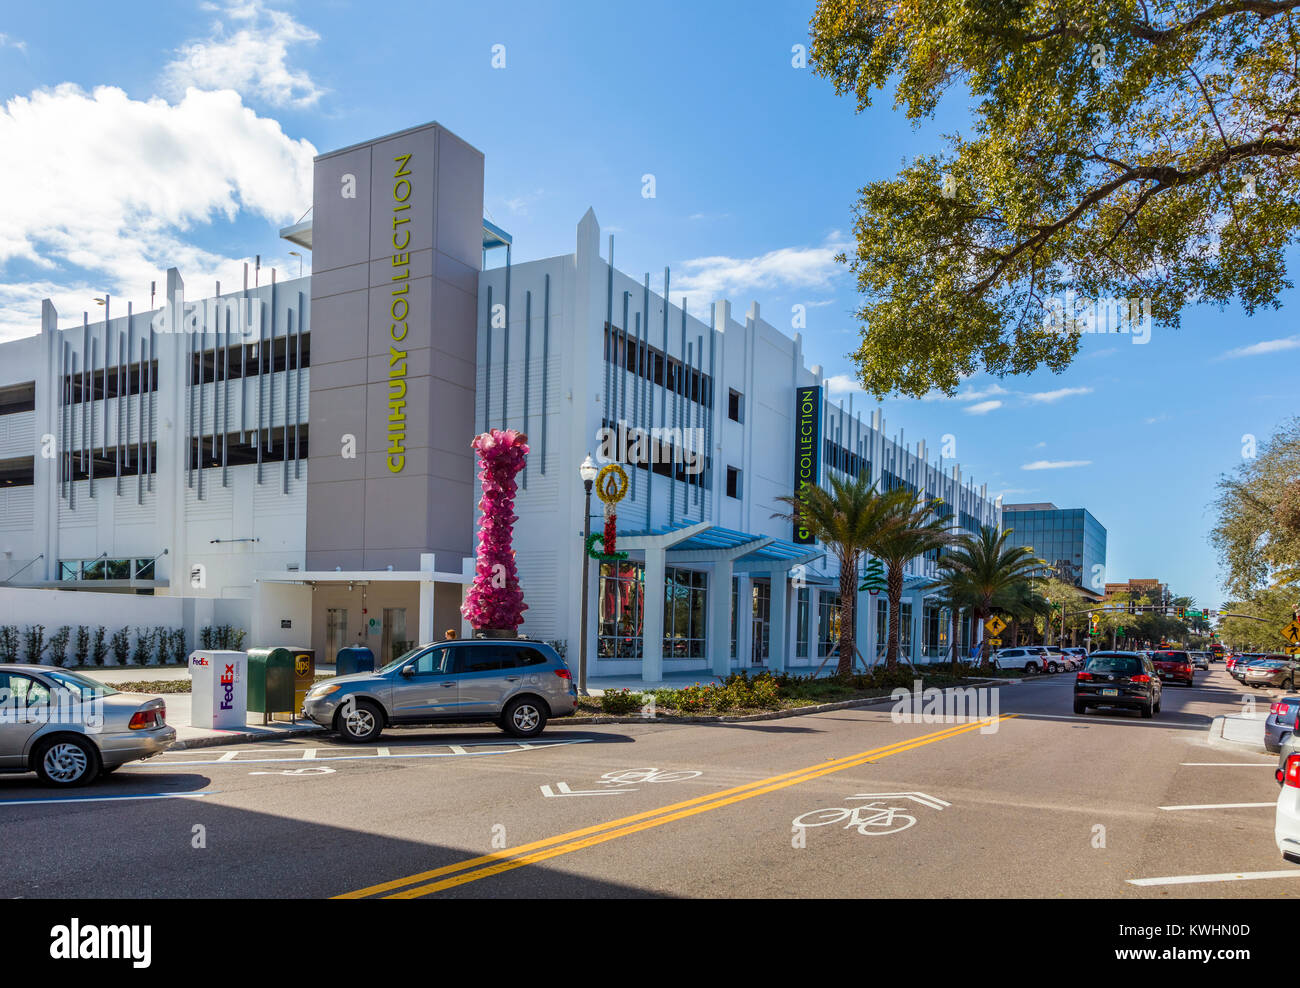 Chihuly Glass Collection building in the Central Arts District of St Petersburg Florida, United States Stock Photo